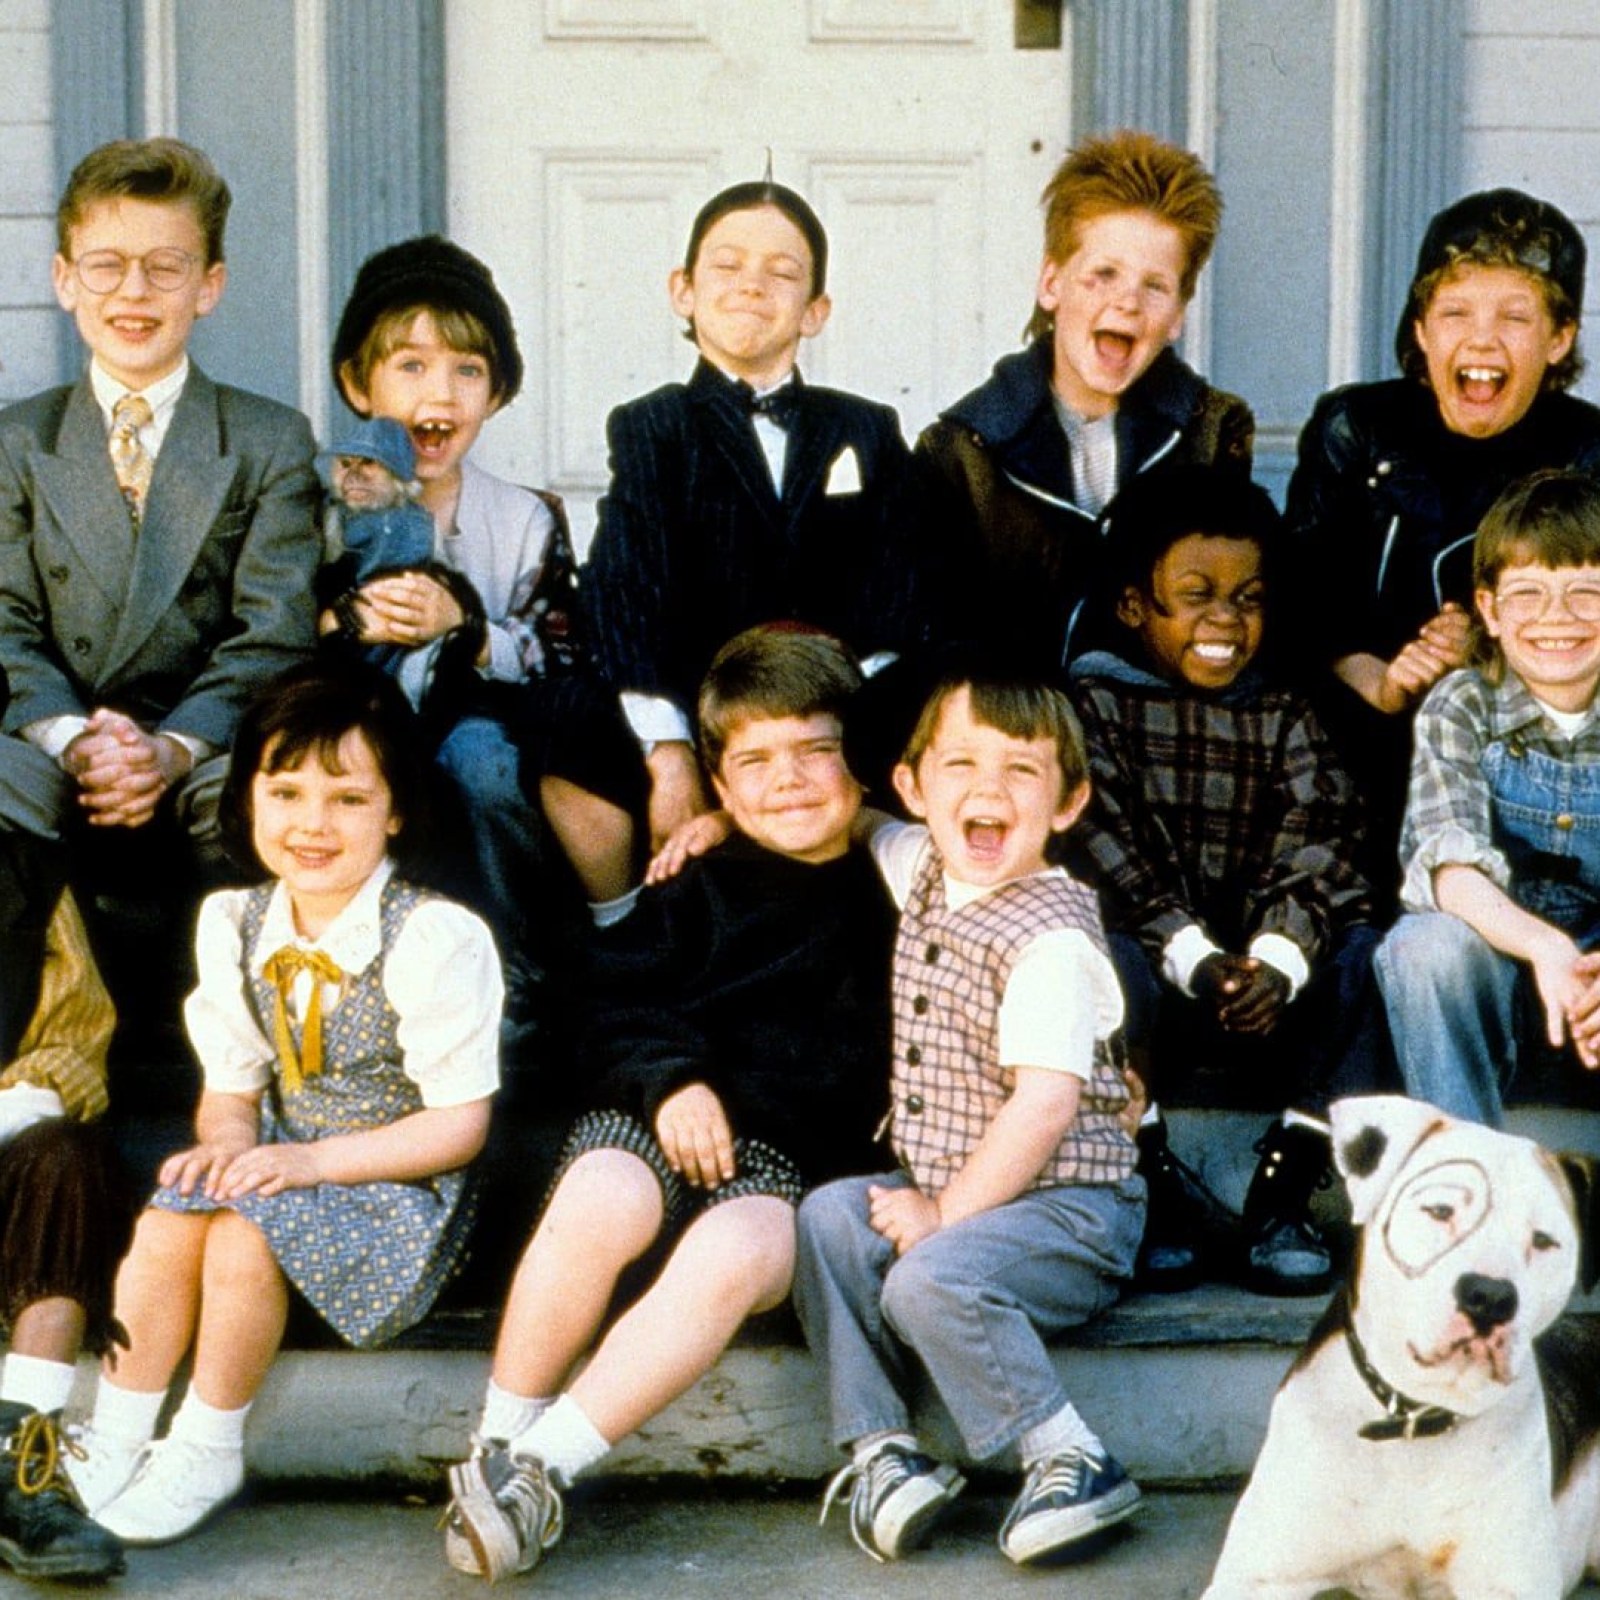 The Little Rascals': Where is the Cast Now as Movie Enters Netflix